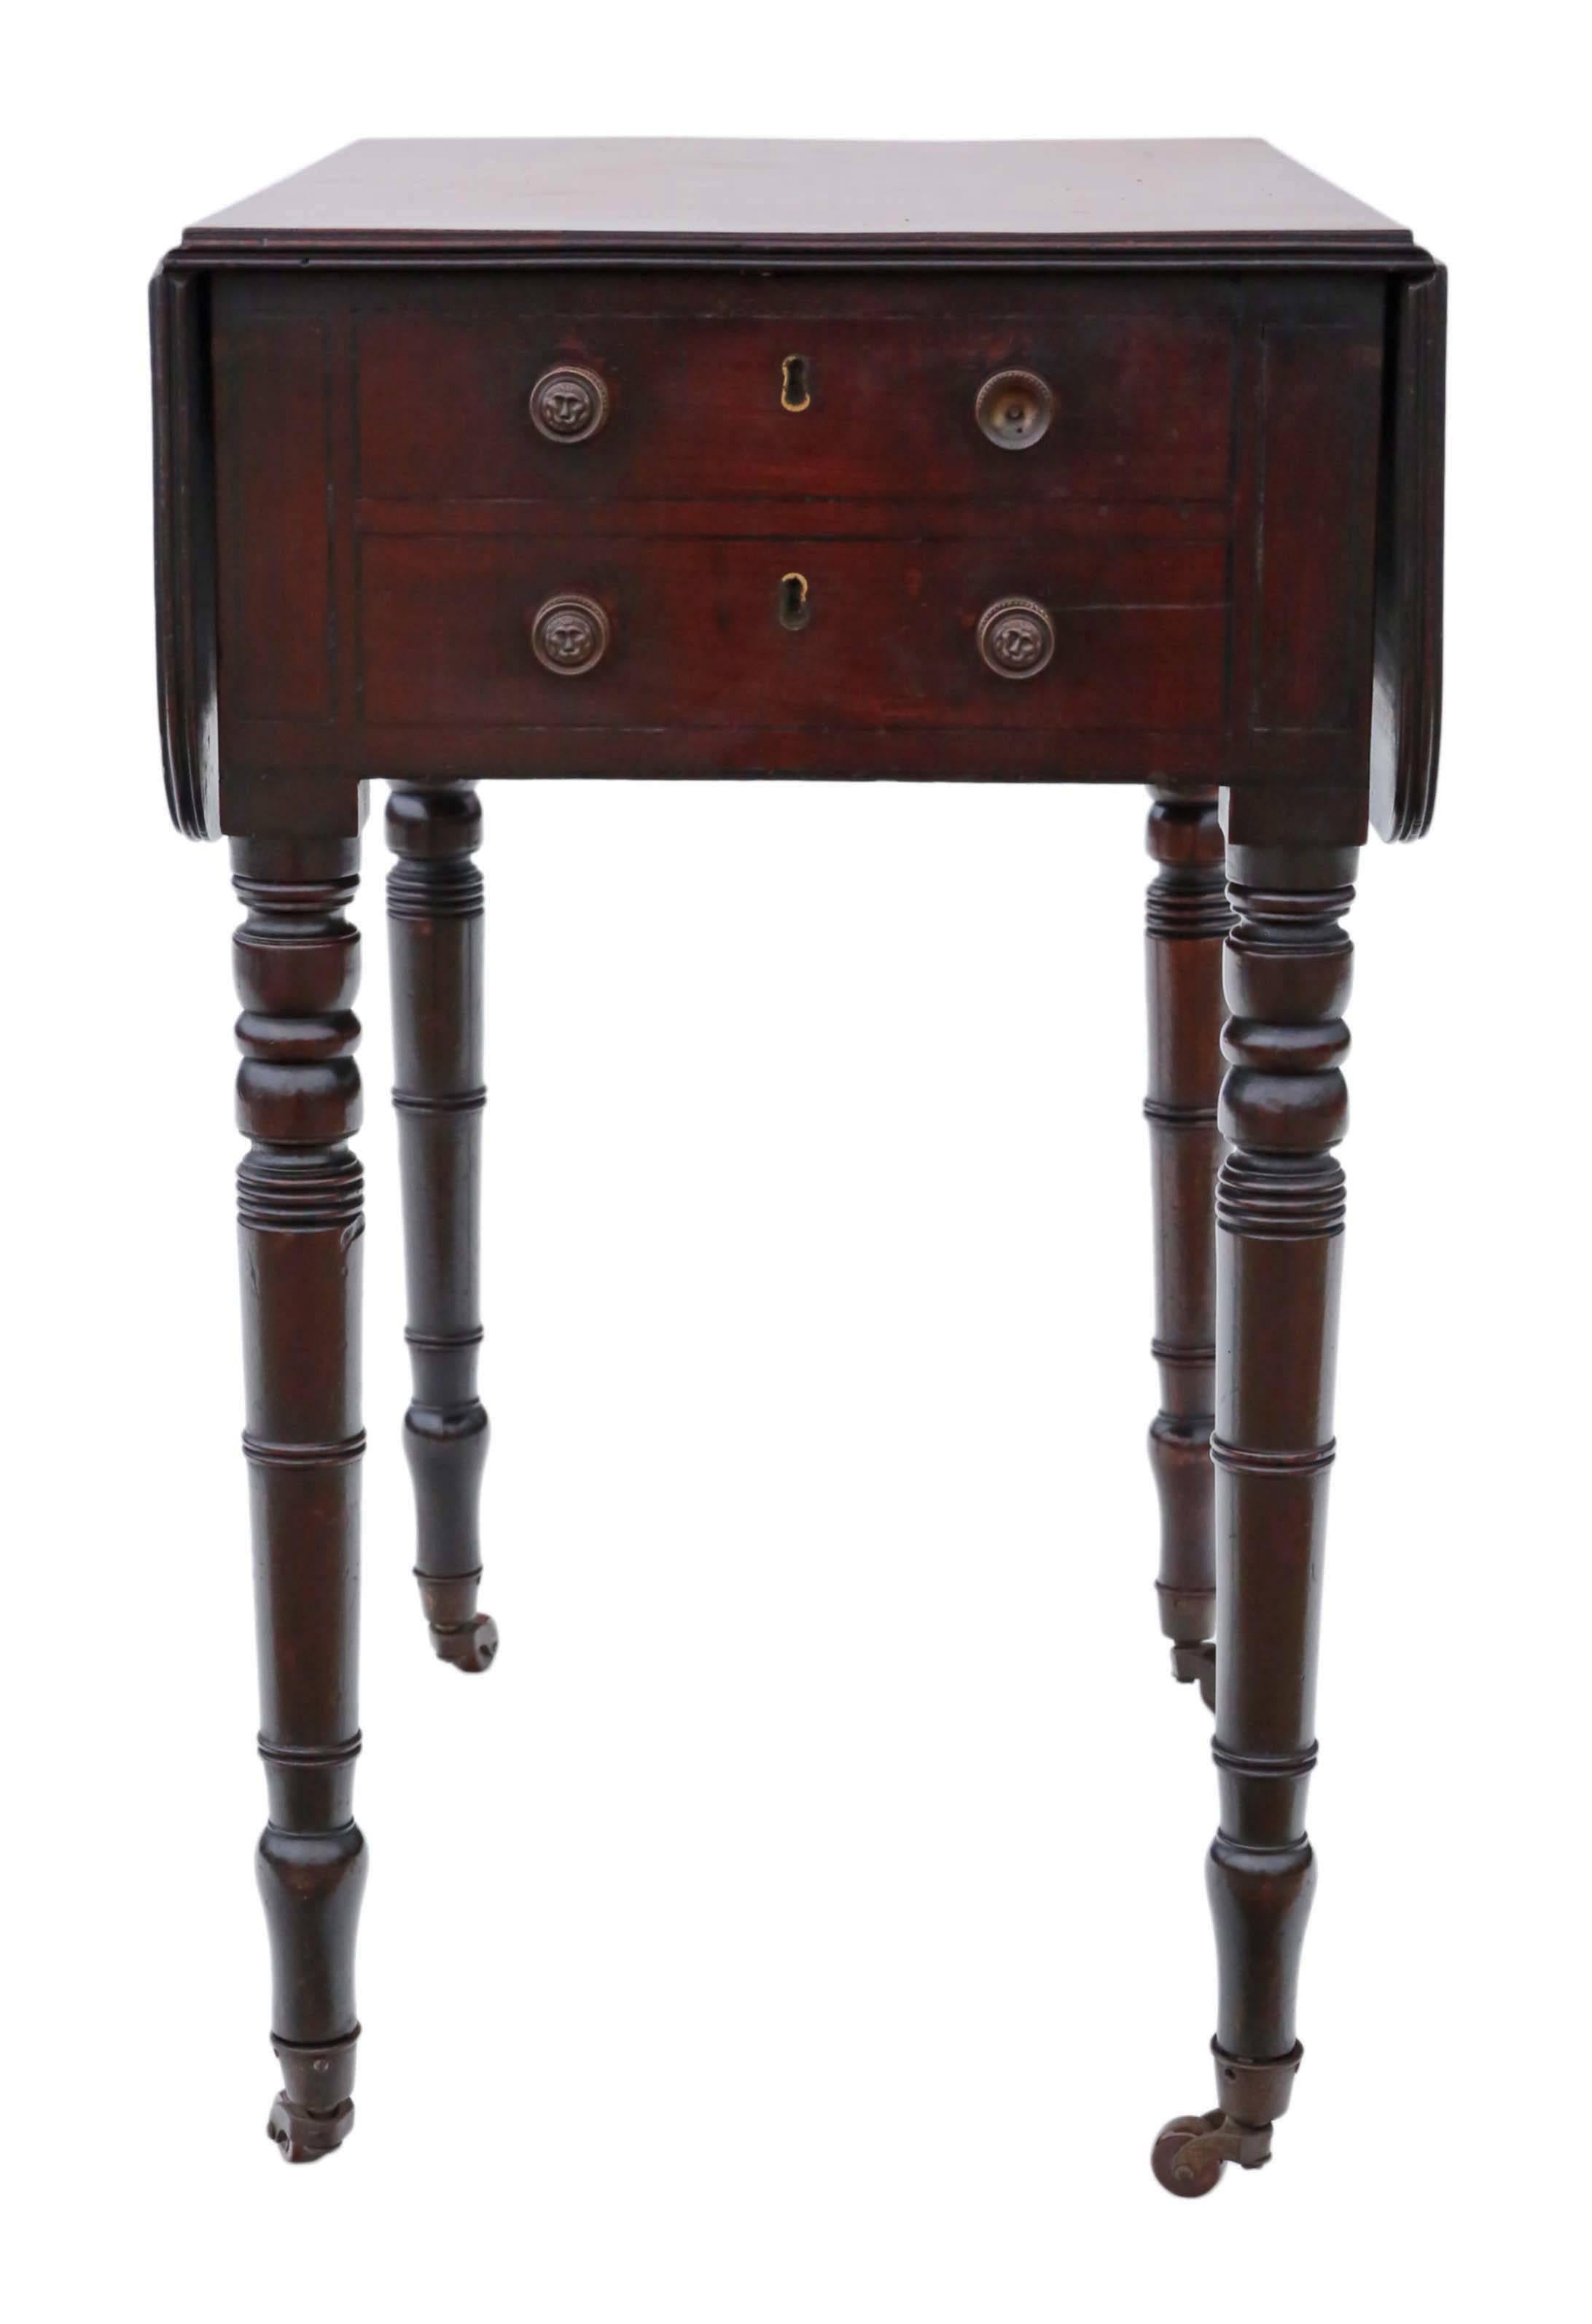 Antique Quality Regency circa 1825 Mahogany Two-Drawer Drop-Leaf Work Table For Sale 4